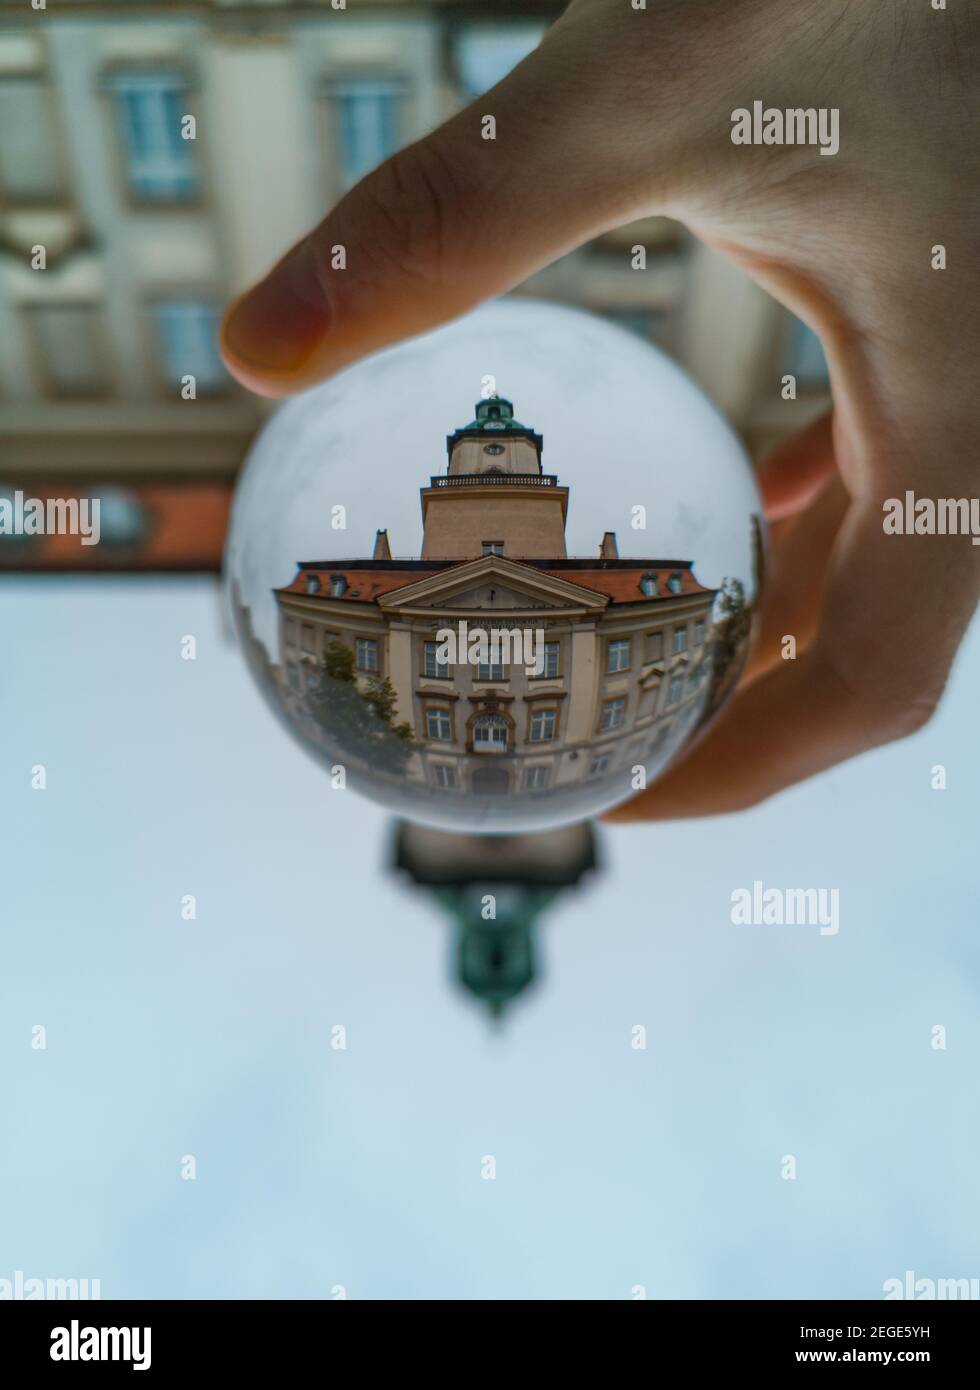 Jelenia Gora September 7 2019 Town hall with clock tower at market square in crystal glassy lensball Stock Photo